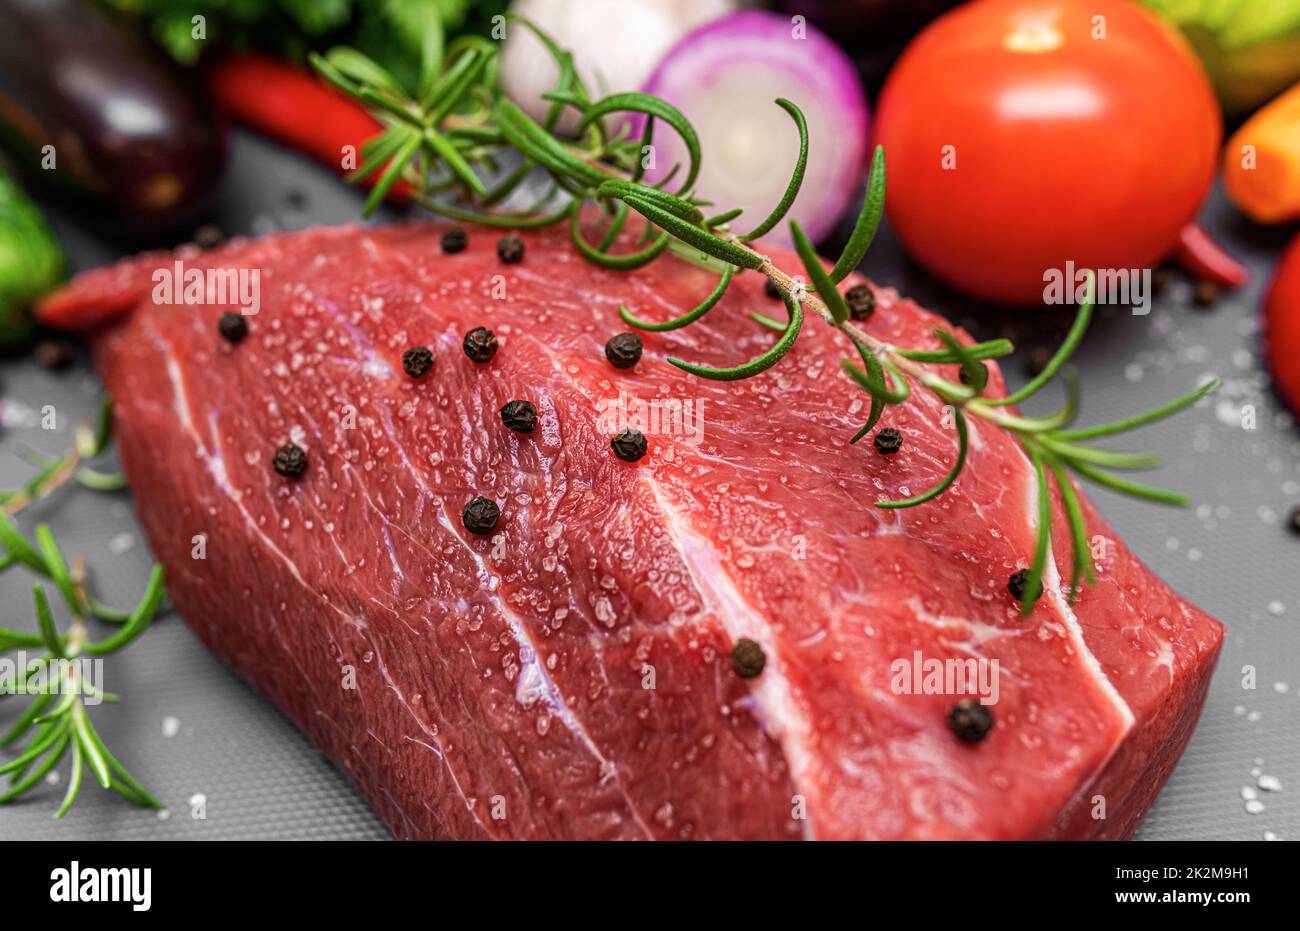 A piece of raw meat on a cutting board. Stock Photo